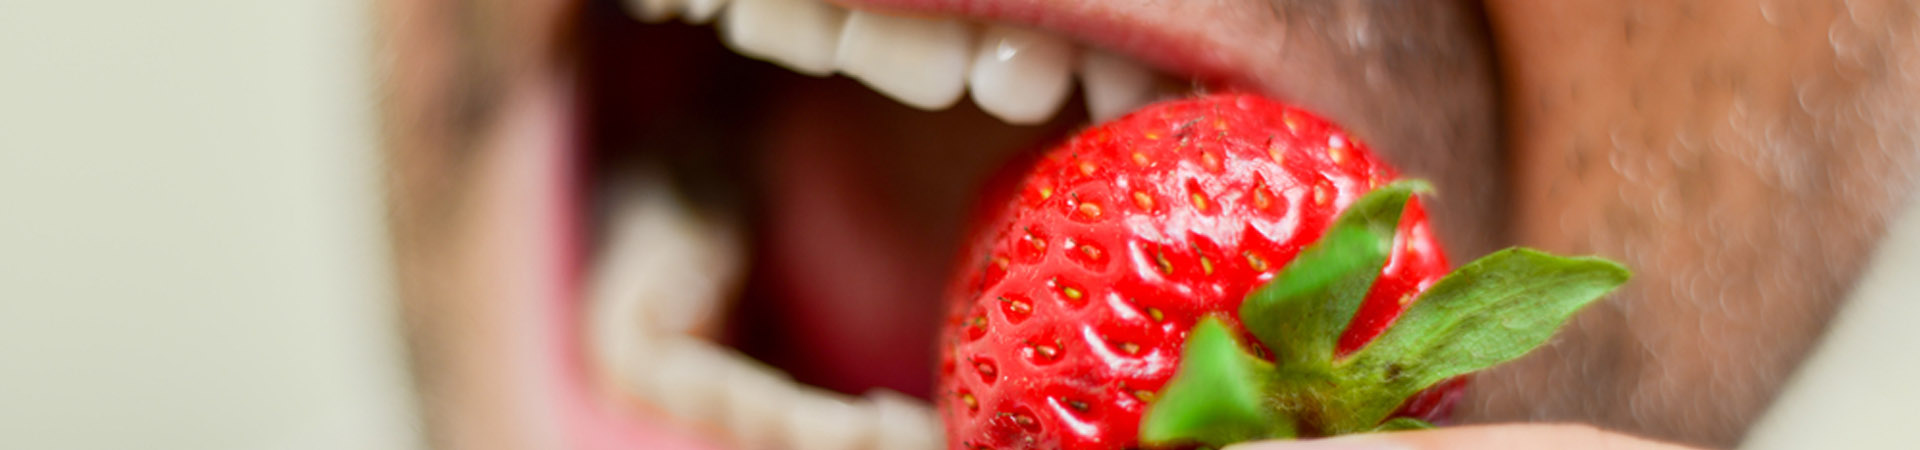 Oral Allergy Syndrome Explained